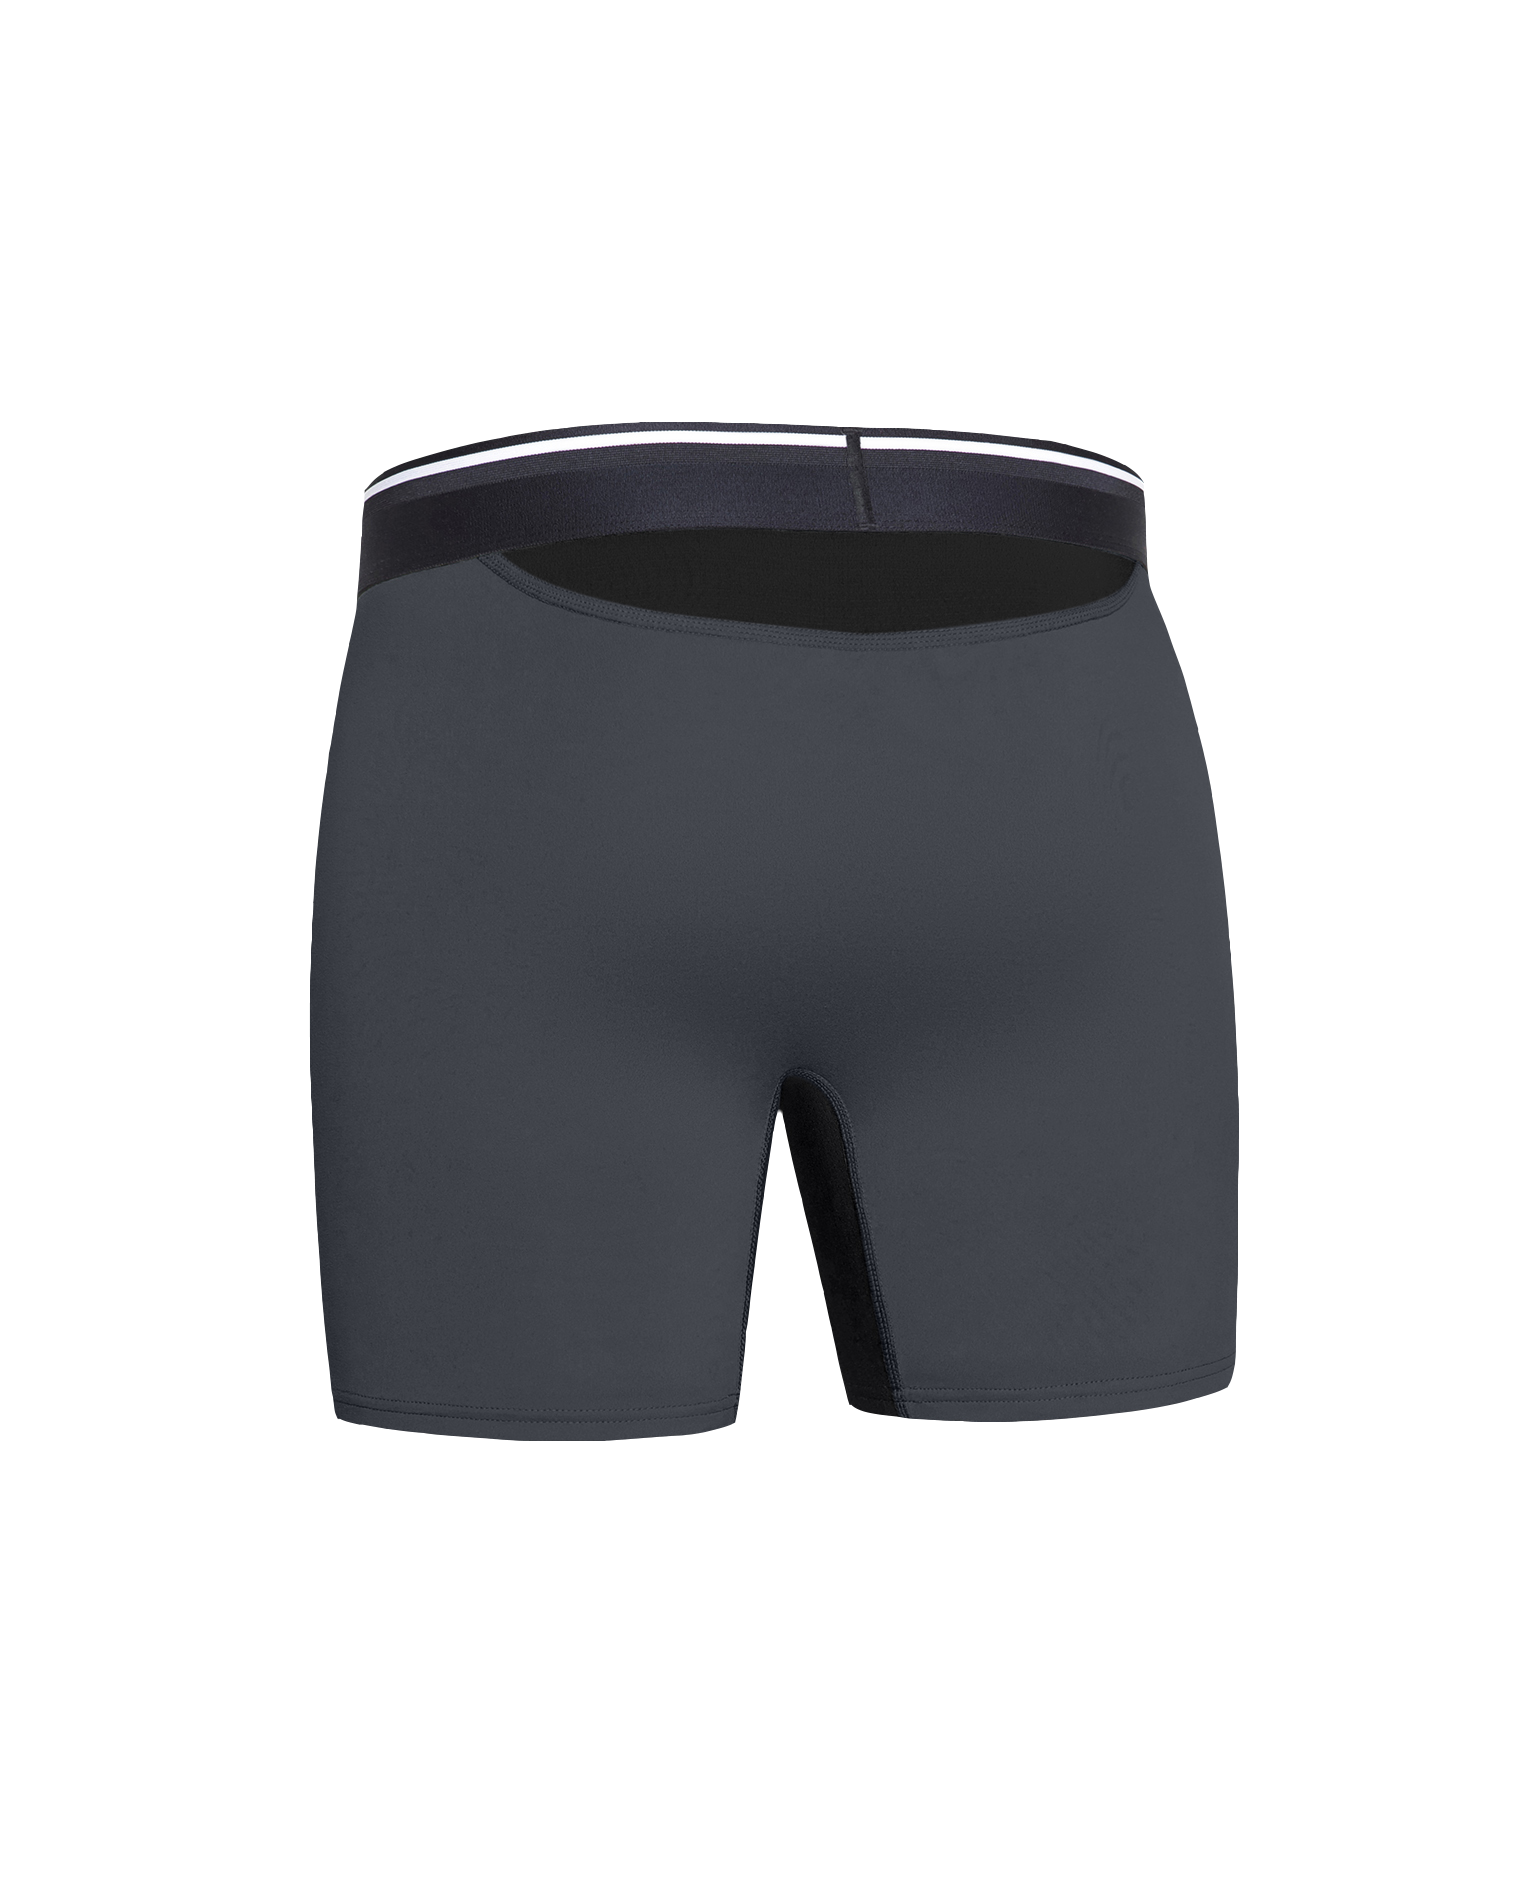 All Citizens Men's Boxer Briefs, underwear men boxer briefs w/Performance  Comfort Fabric, No Ride Up Legs, Breathe Zones, Sweat-Wicking, Anti-Chafing  Light Grey at  Men's Clothing store